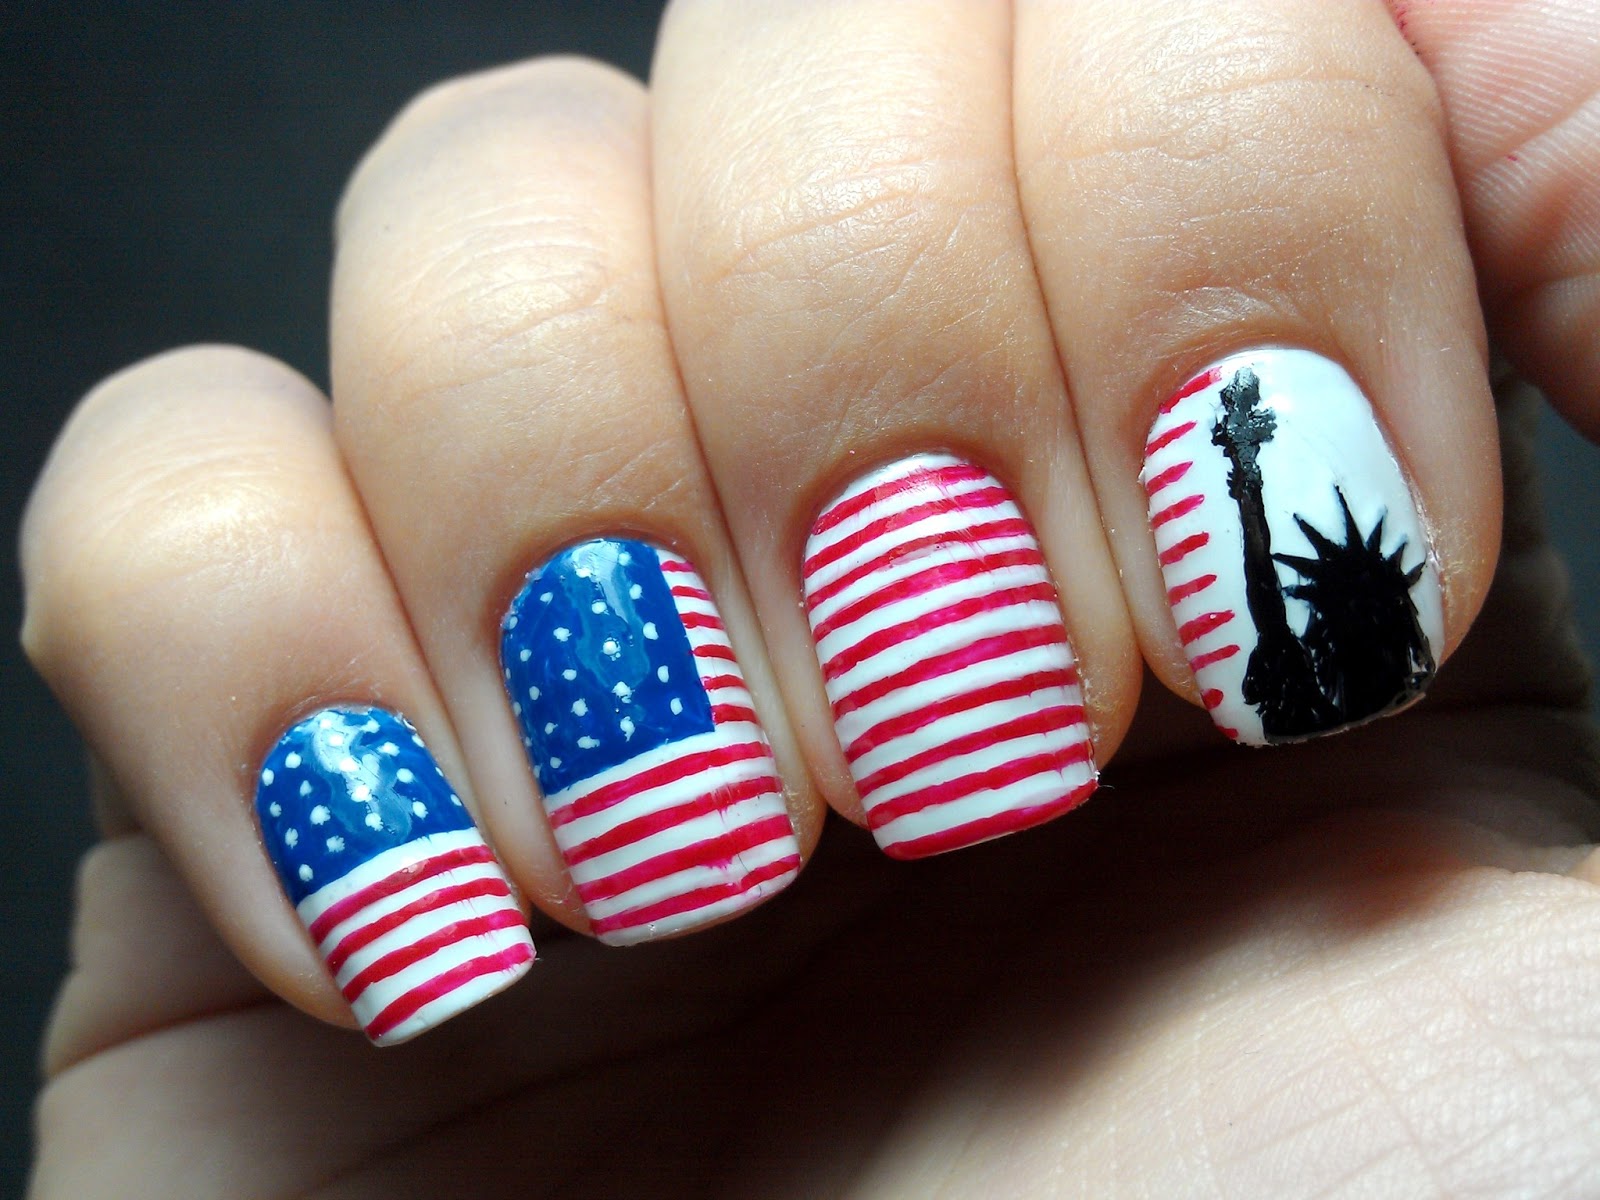 4. American Flag Nail Designs for the 4th of July - wide 4